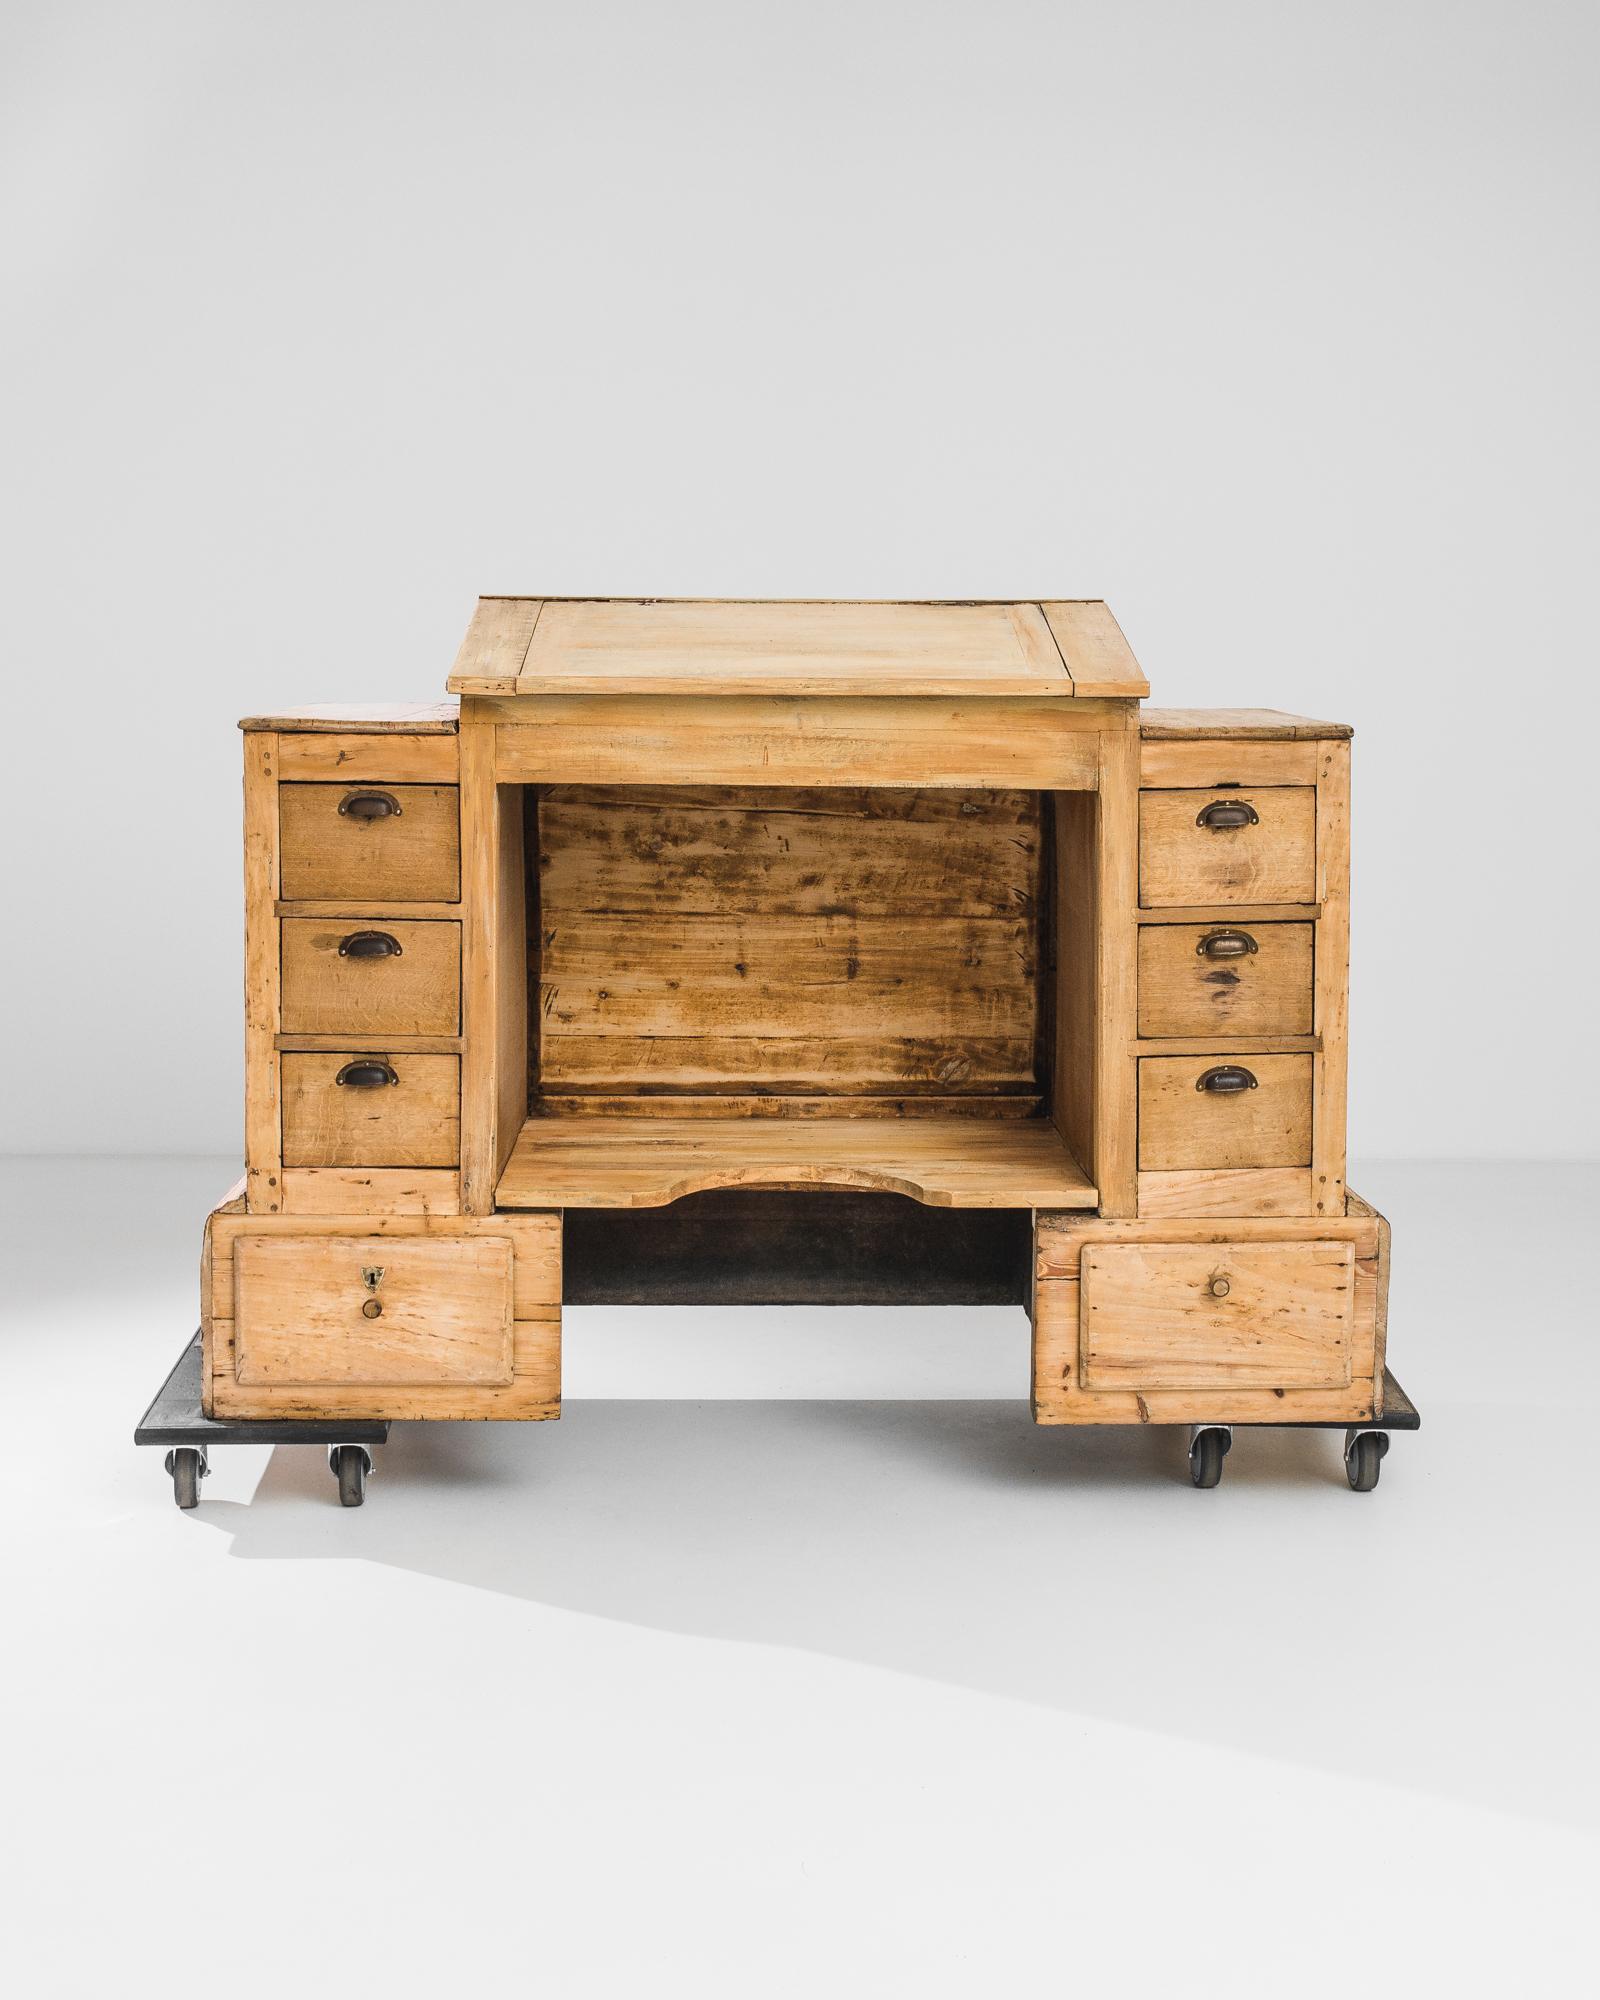 A wooden desk from France, produced circa 1880. A vintage writing desk perfect for the modern working person. Featuring a slanted writing surface with storage area inside, eight drawers in neat columns of four, footrest and podiums flanking the